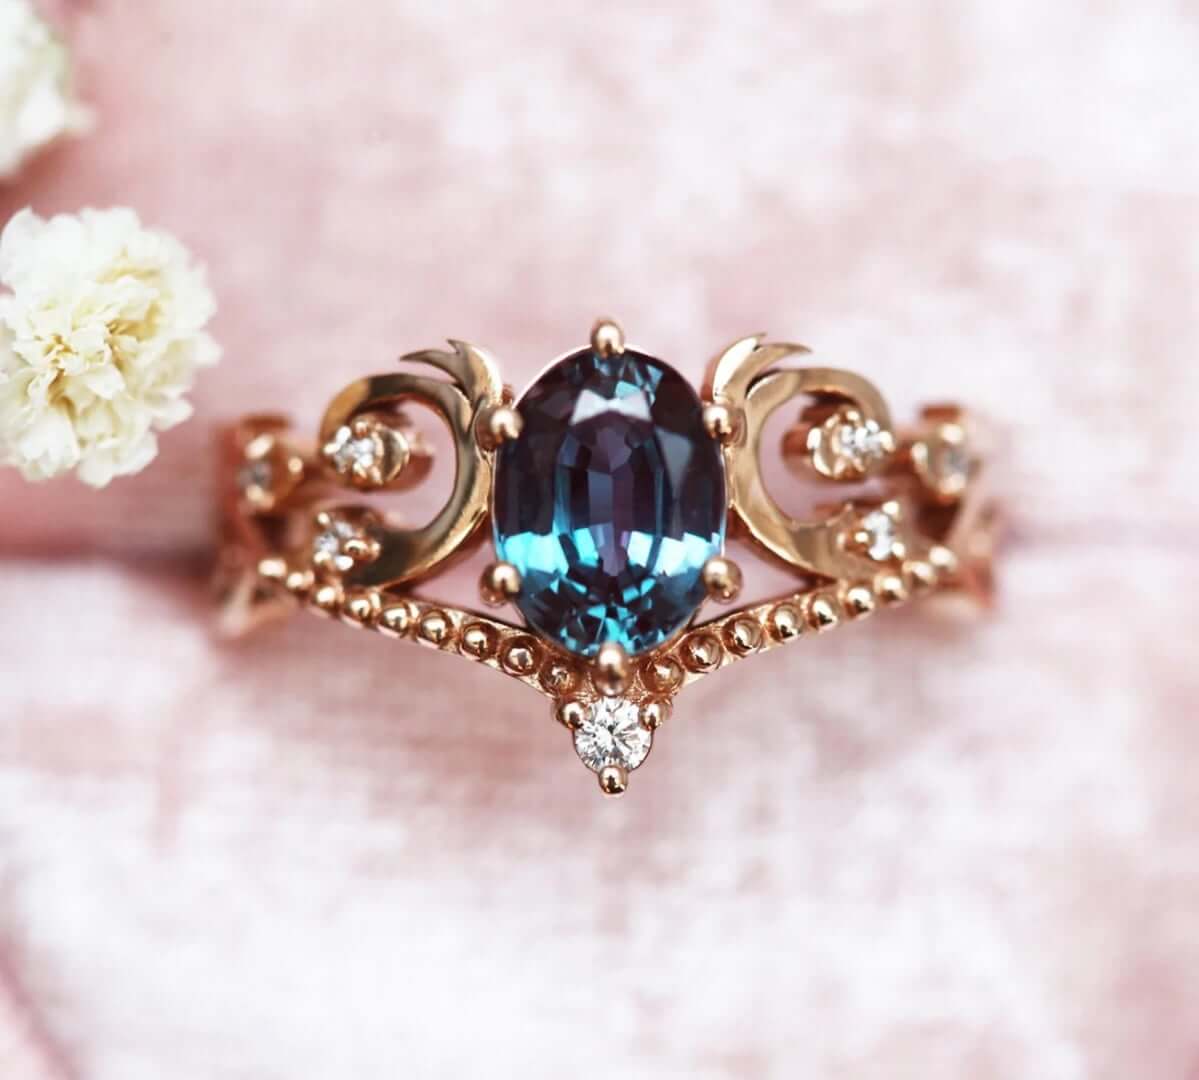 A vintage-style alexandrite and diamond ring by Capucinne